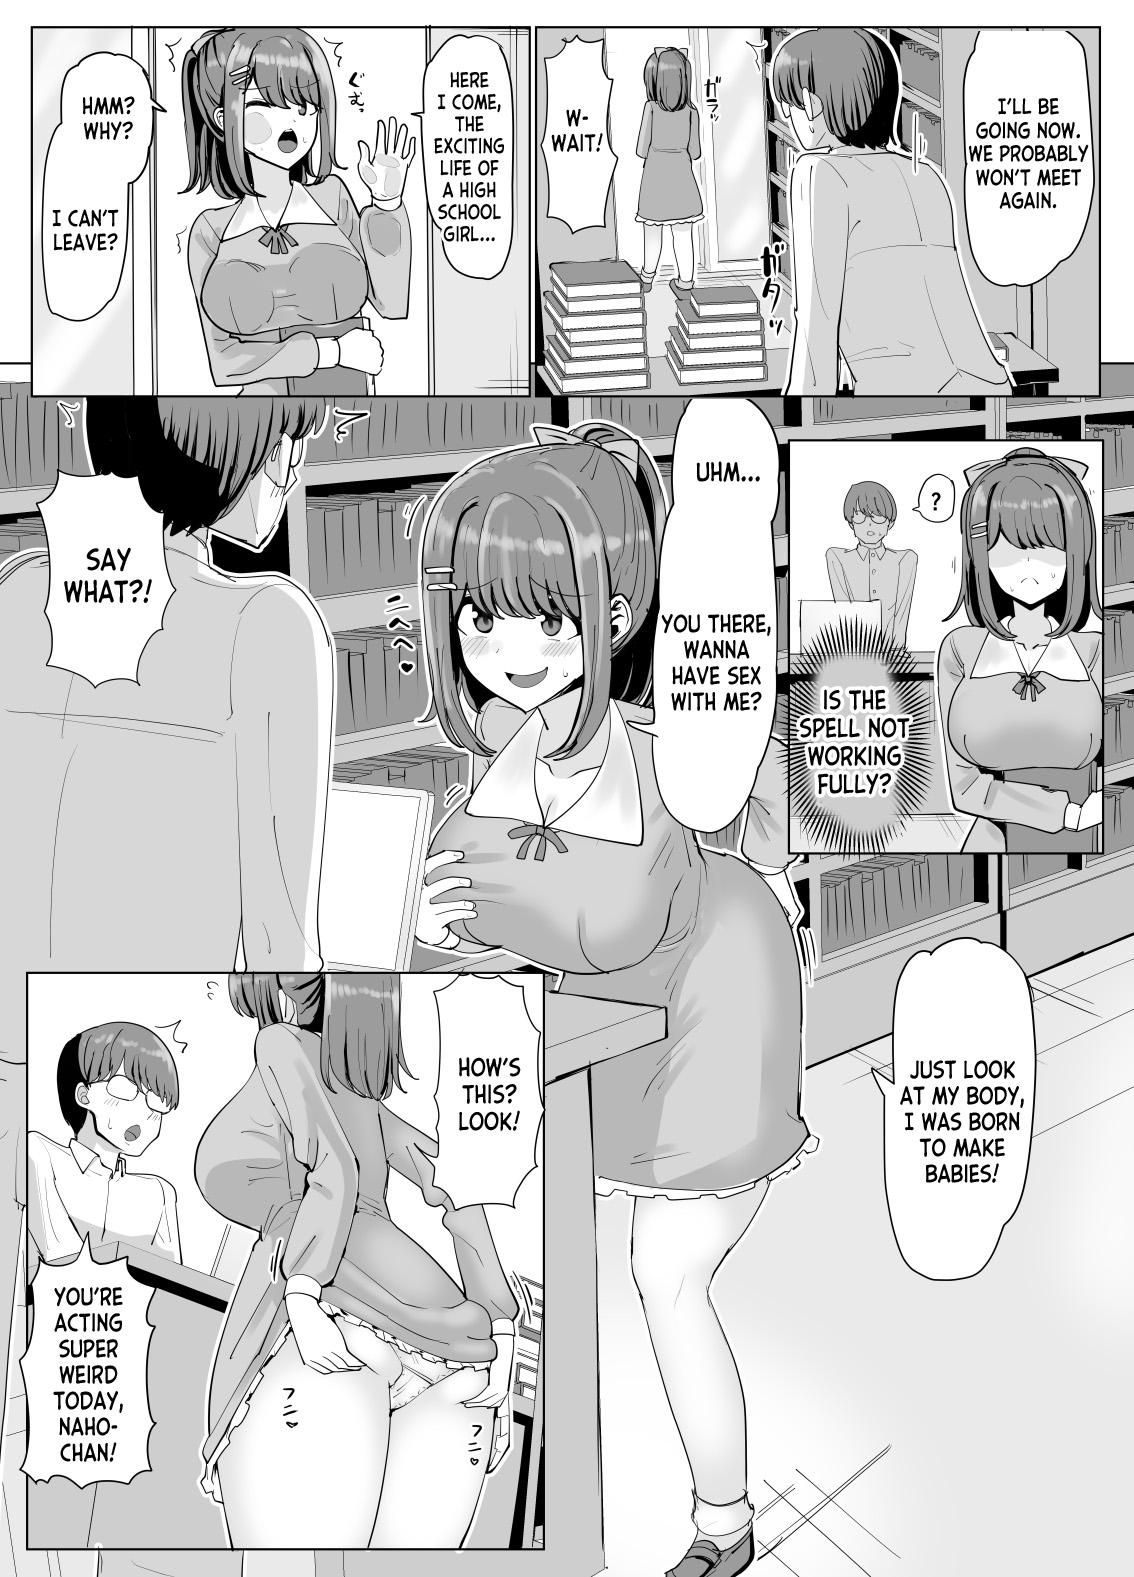 Office College Girl Taken Over by an Old Man 1+2 - Original Pakistani - Page 6